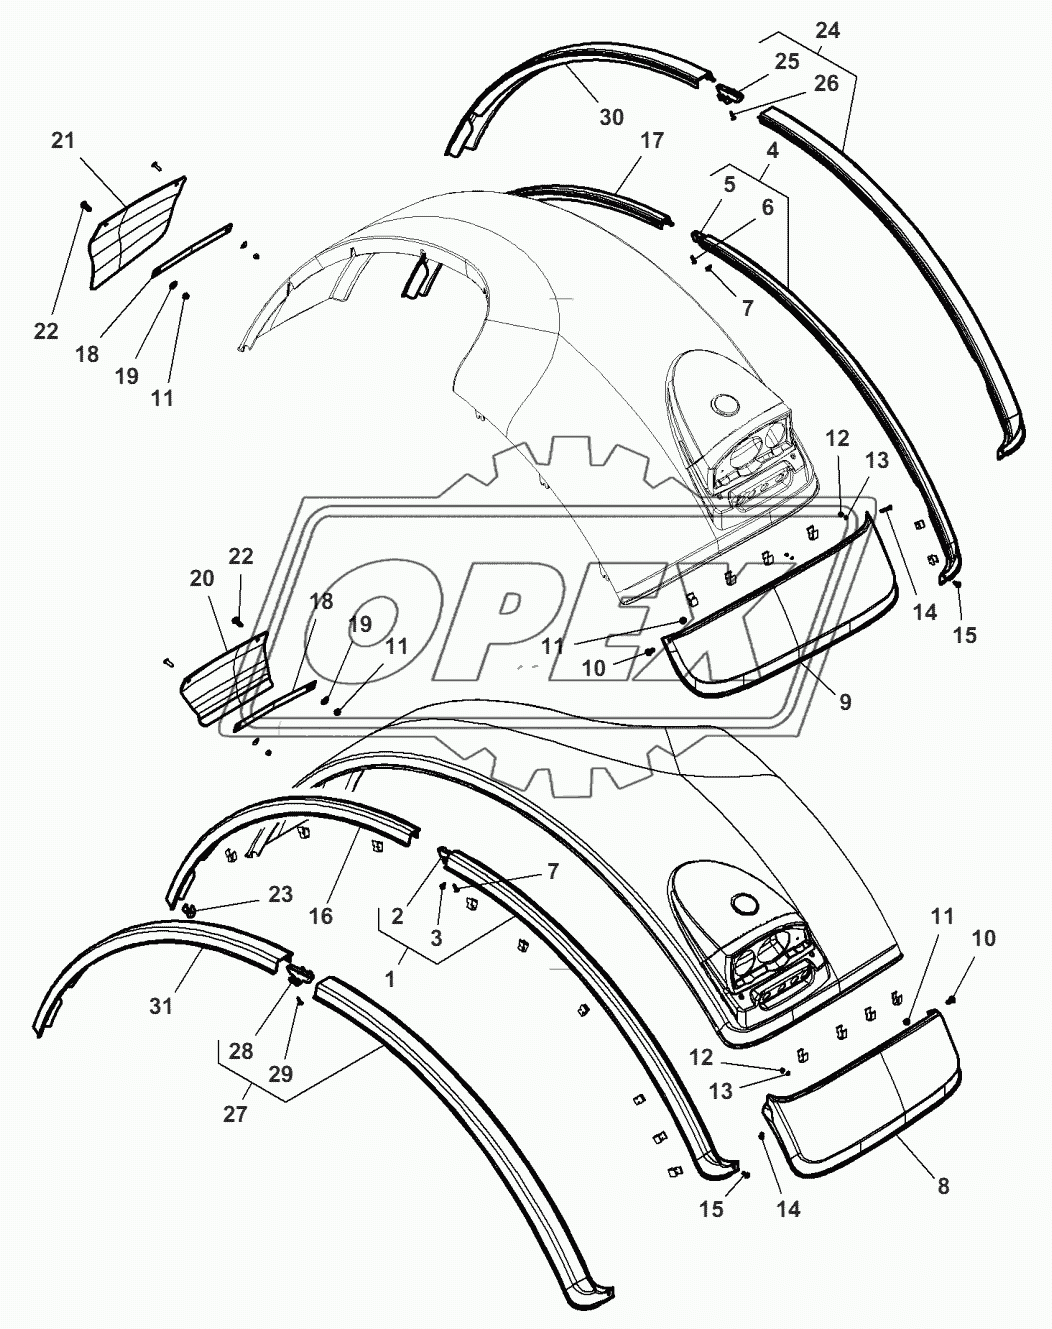 Tractor Cab - Fenders - Fenders Extension